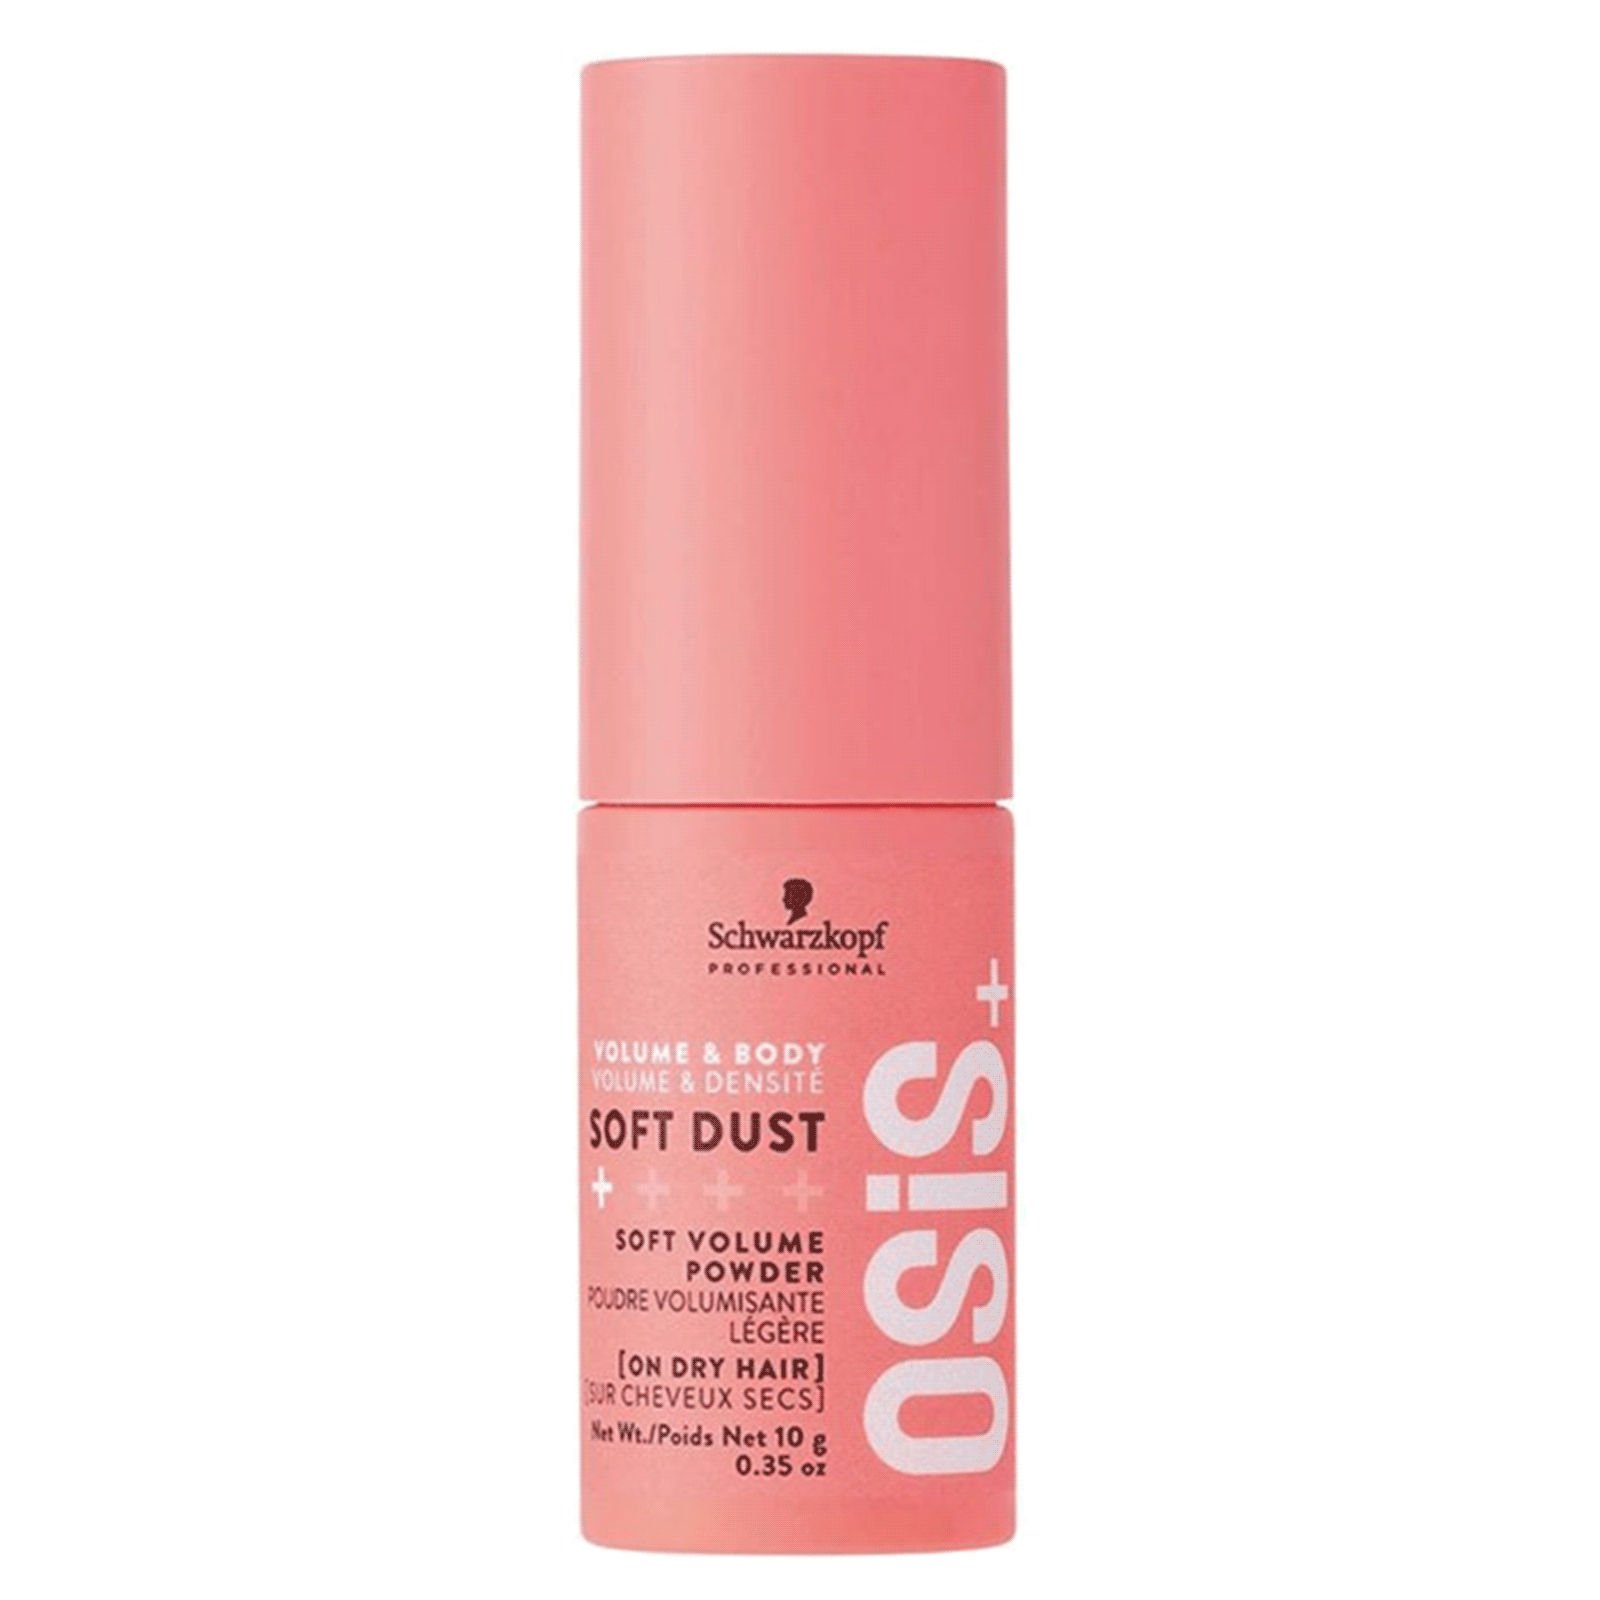 OSIS+ Dry Soft Dust